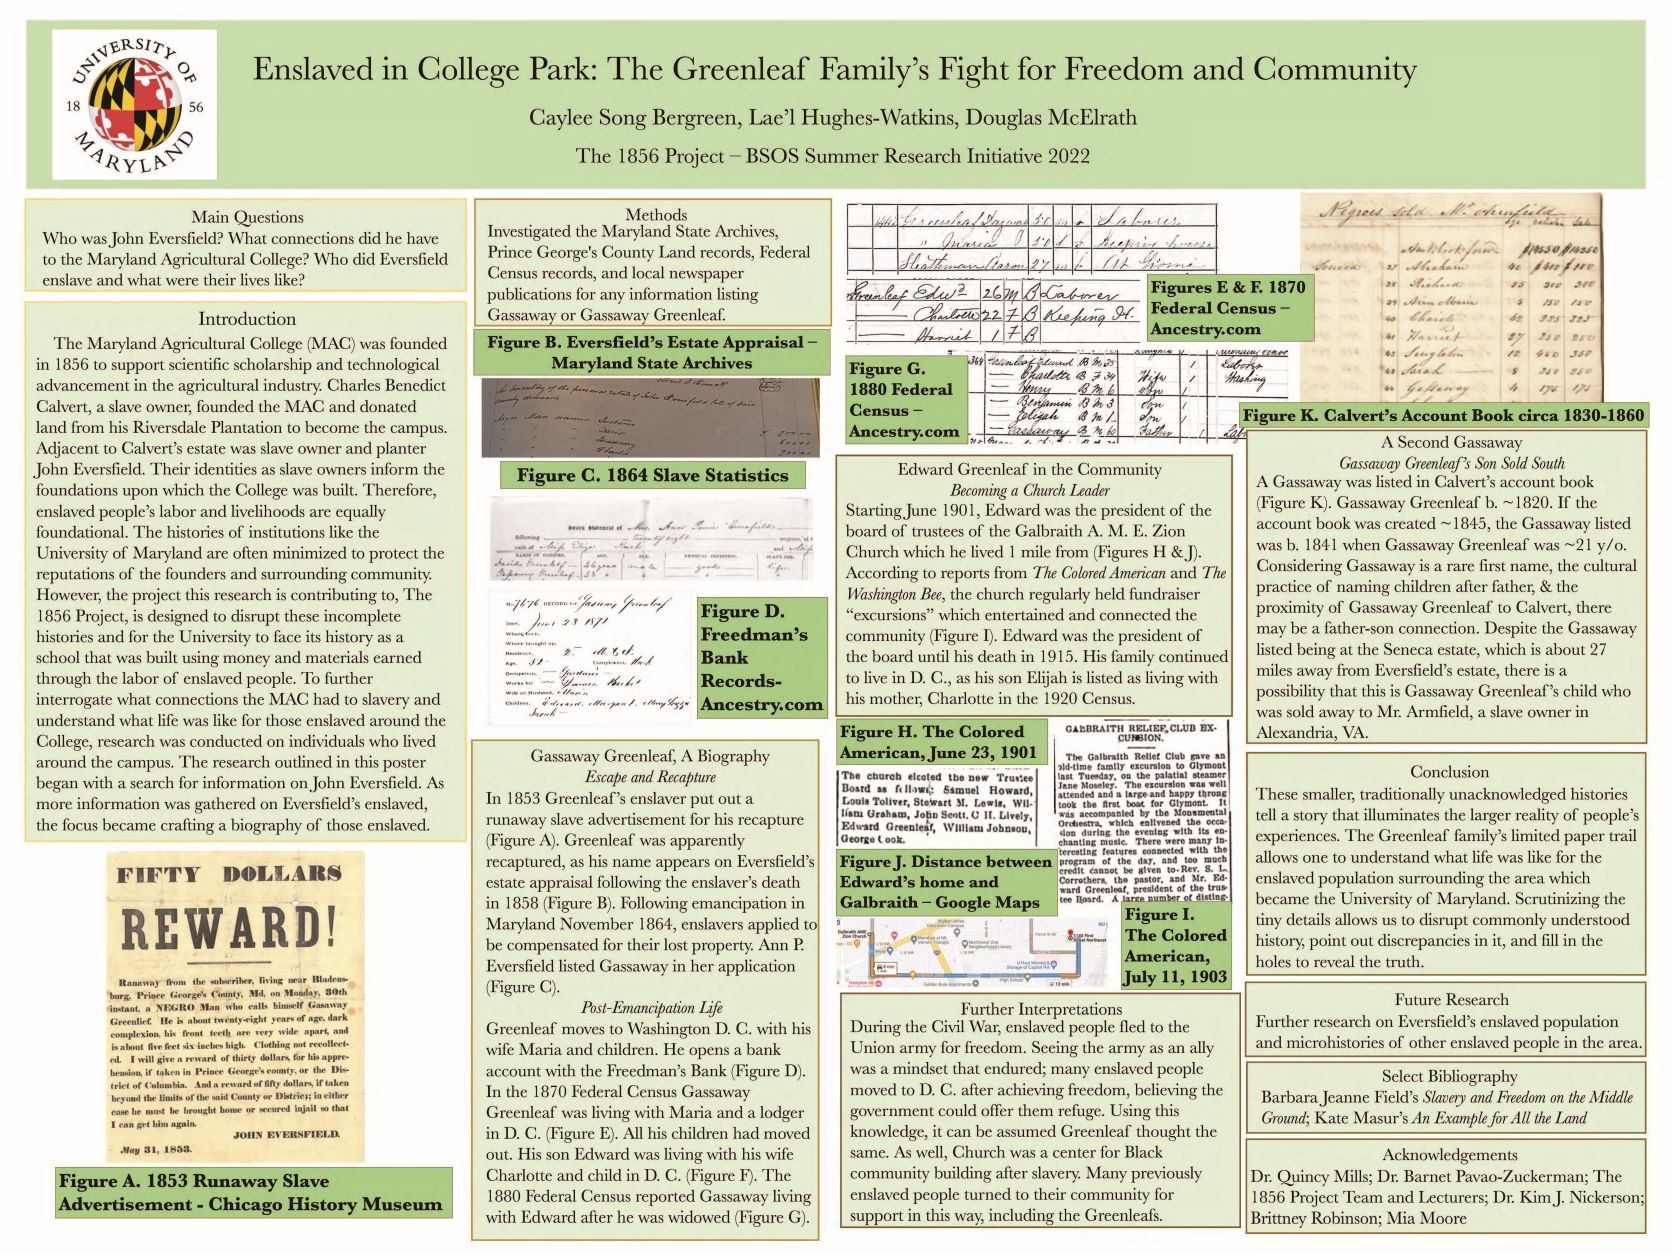 poster featuring information on enslaved Greenleaf family